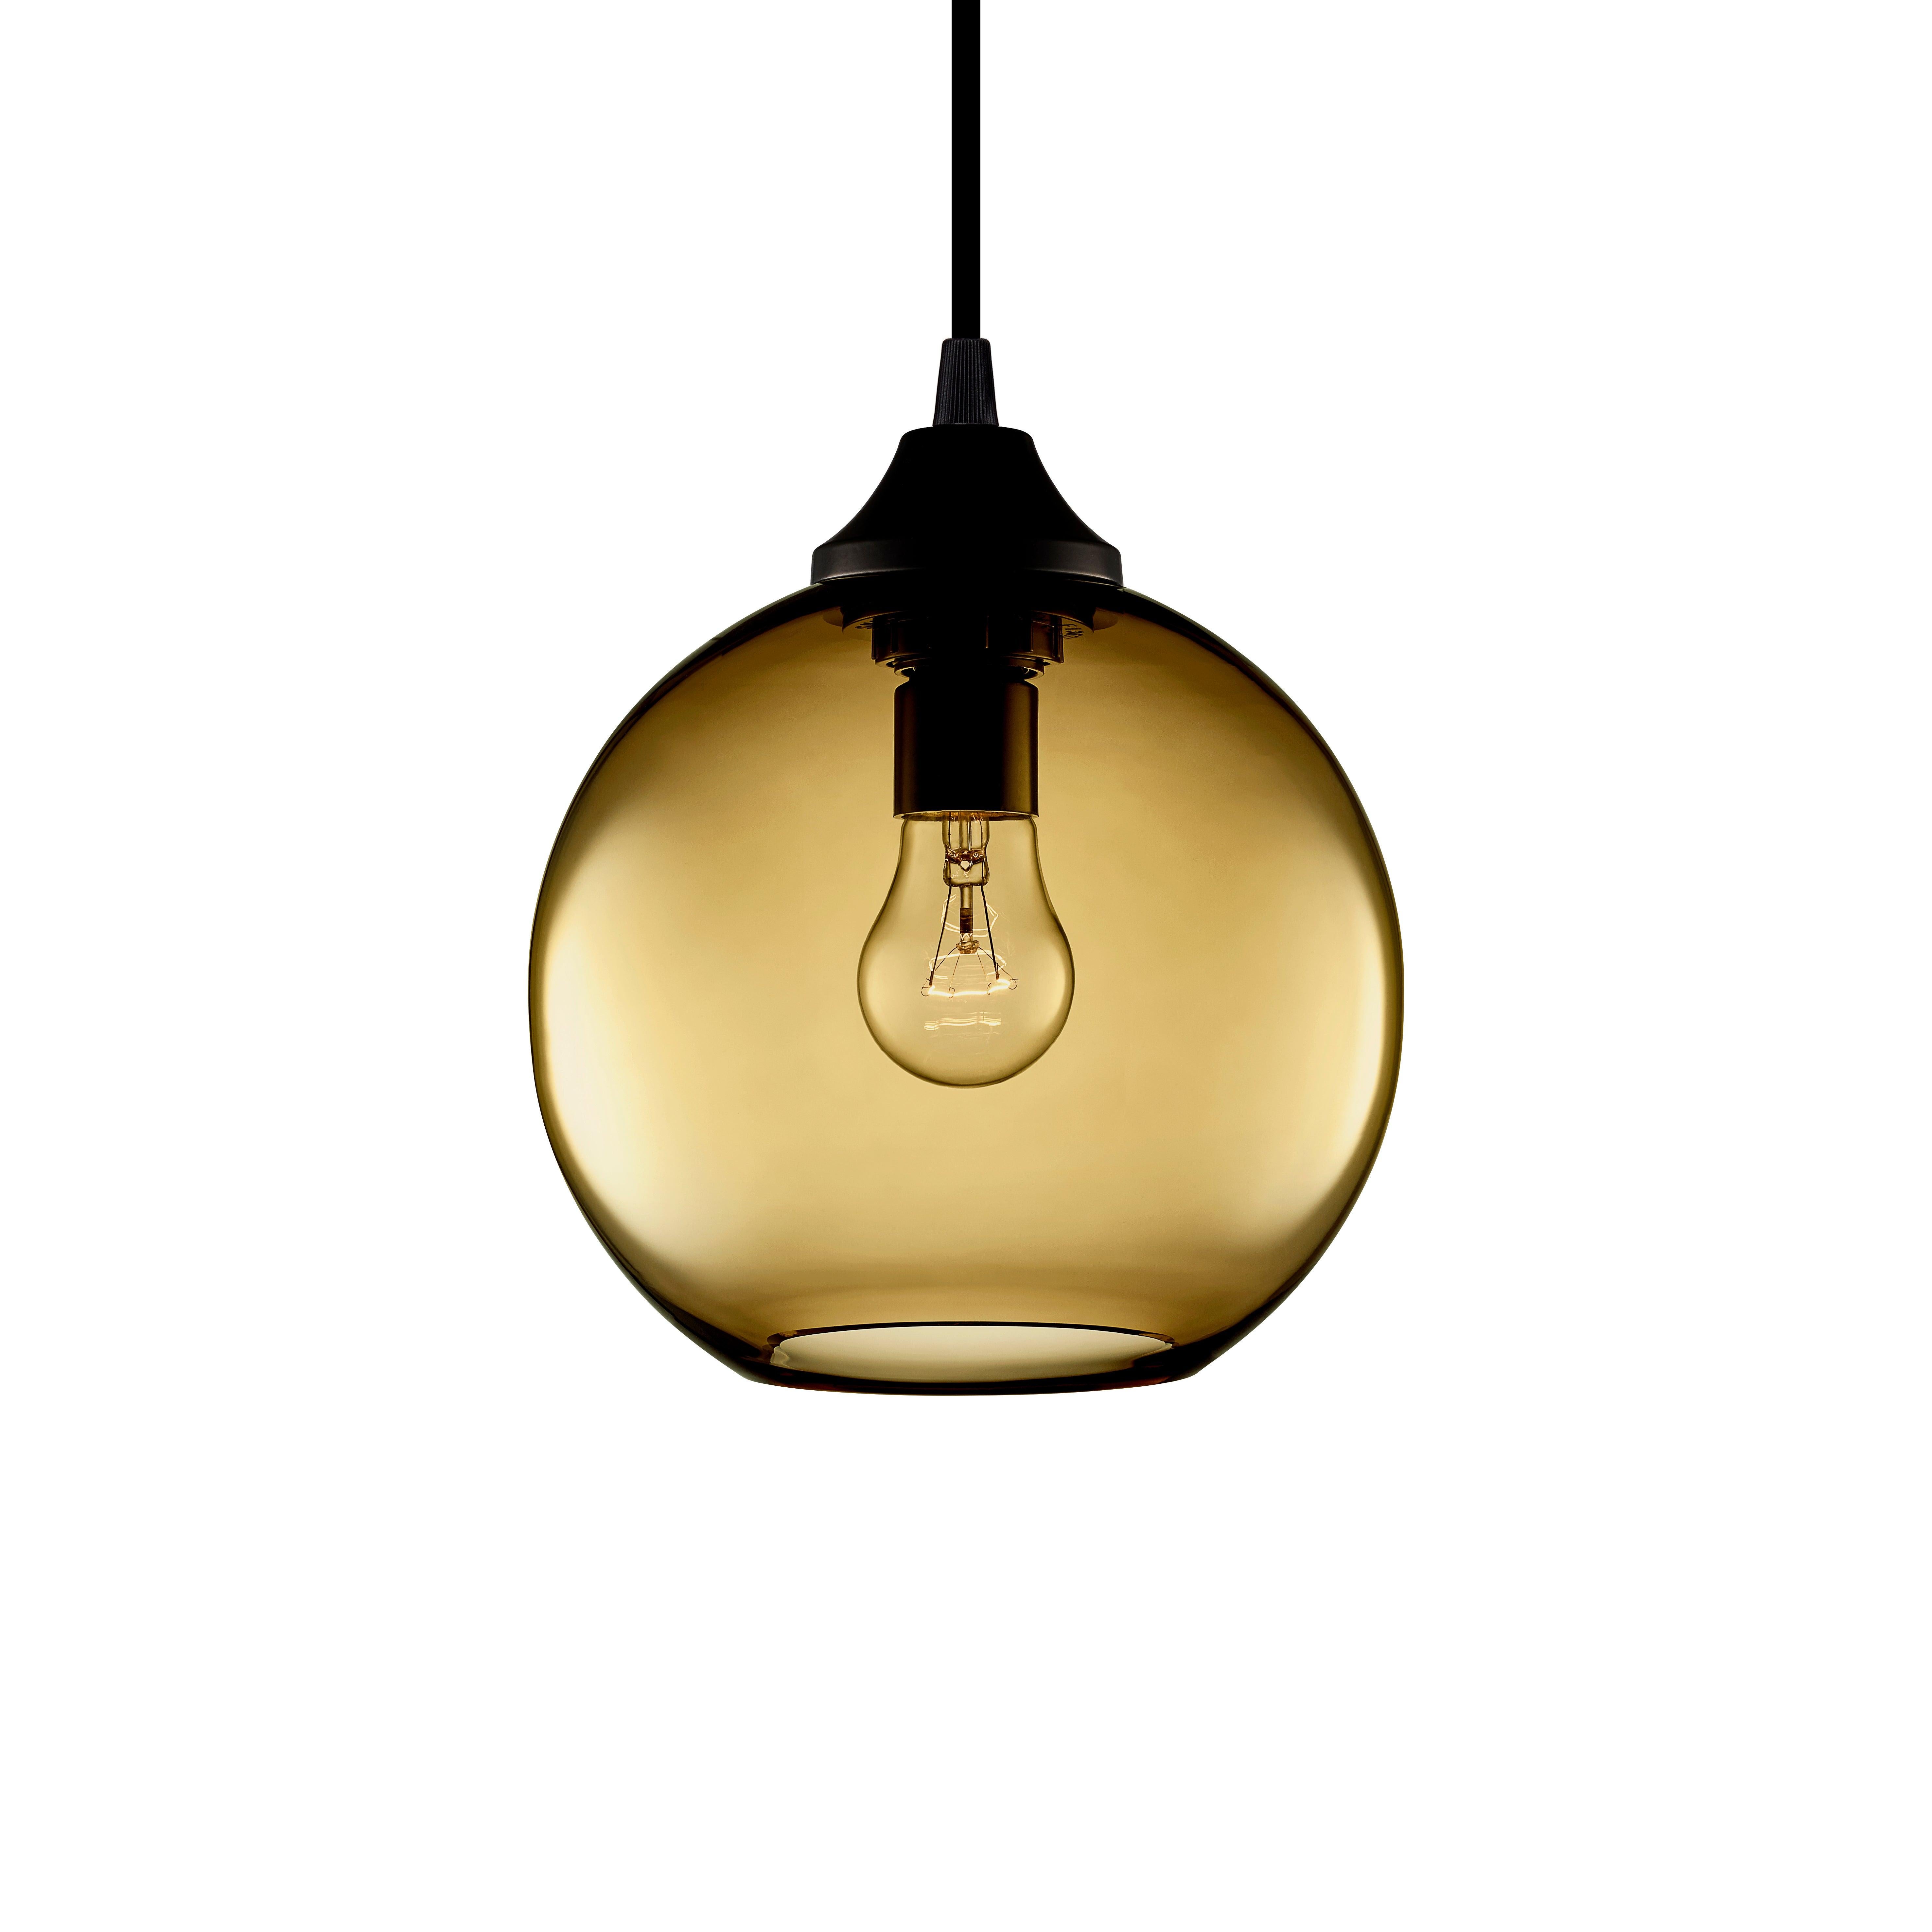 Contemporary Solitaire Petite Amber Handblown Modern Glass Pendant Light, Made in the USA For Sale